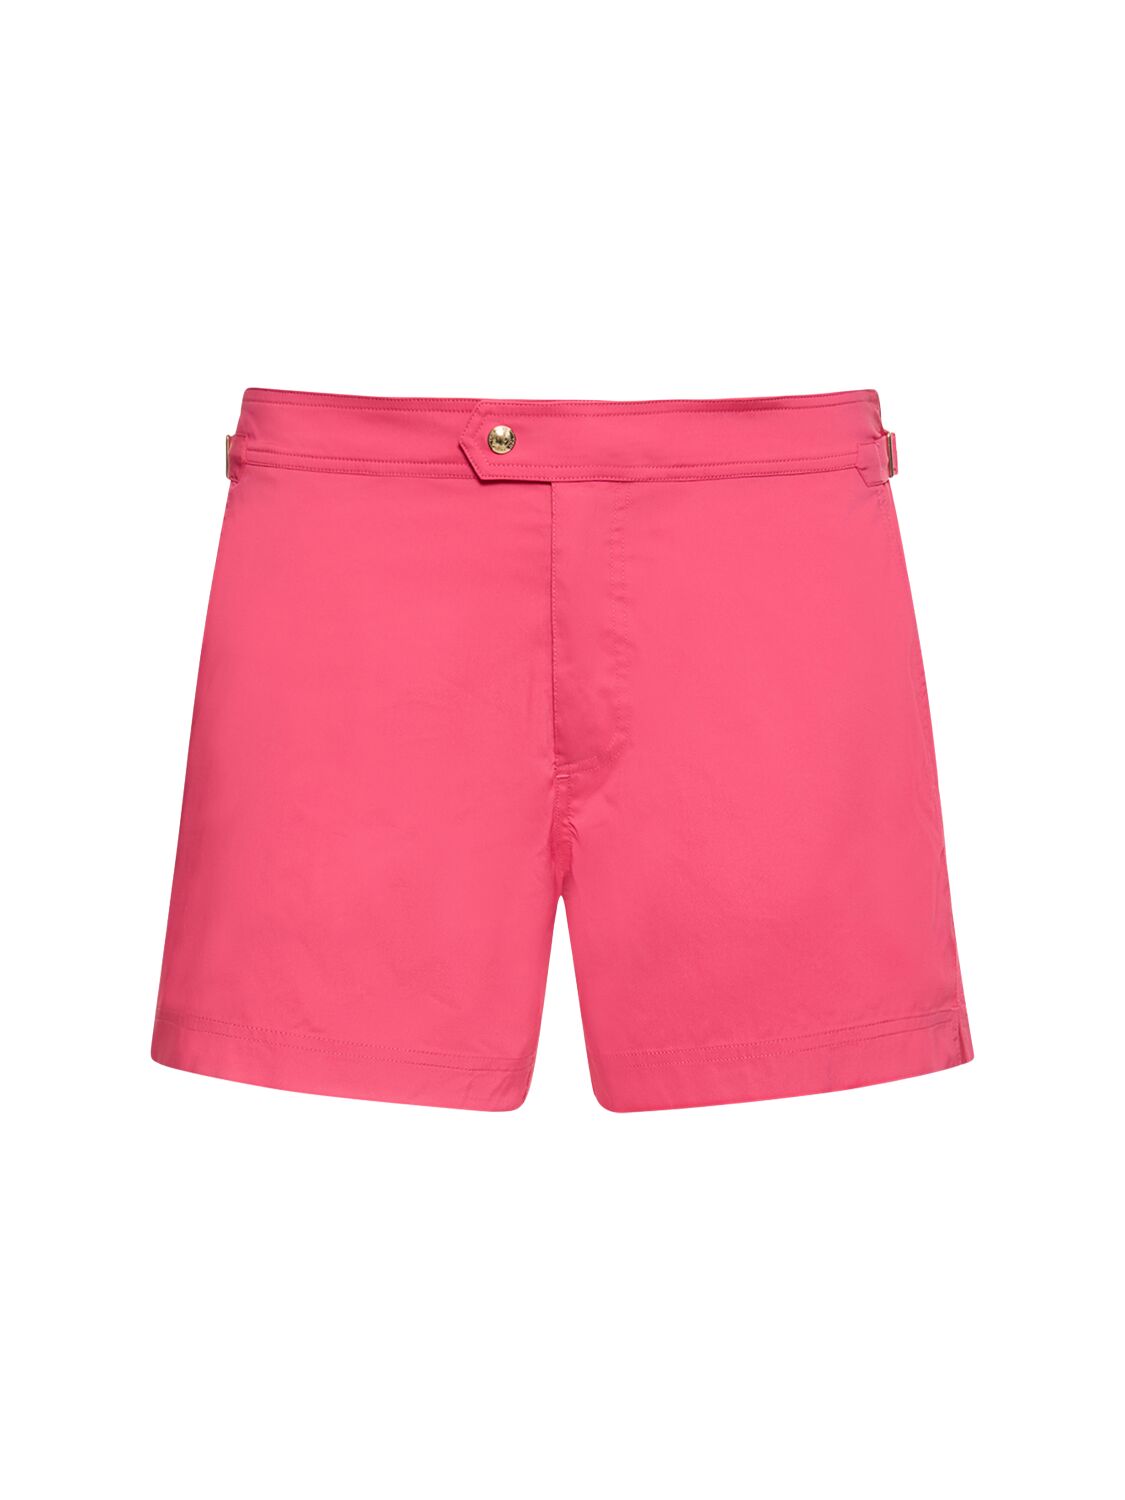 Shop Tom Ford Compact Poplin Swim Shorts W/ Piping In Bright Pink